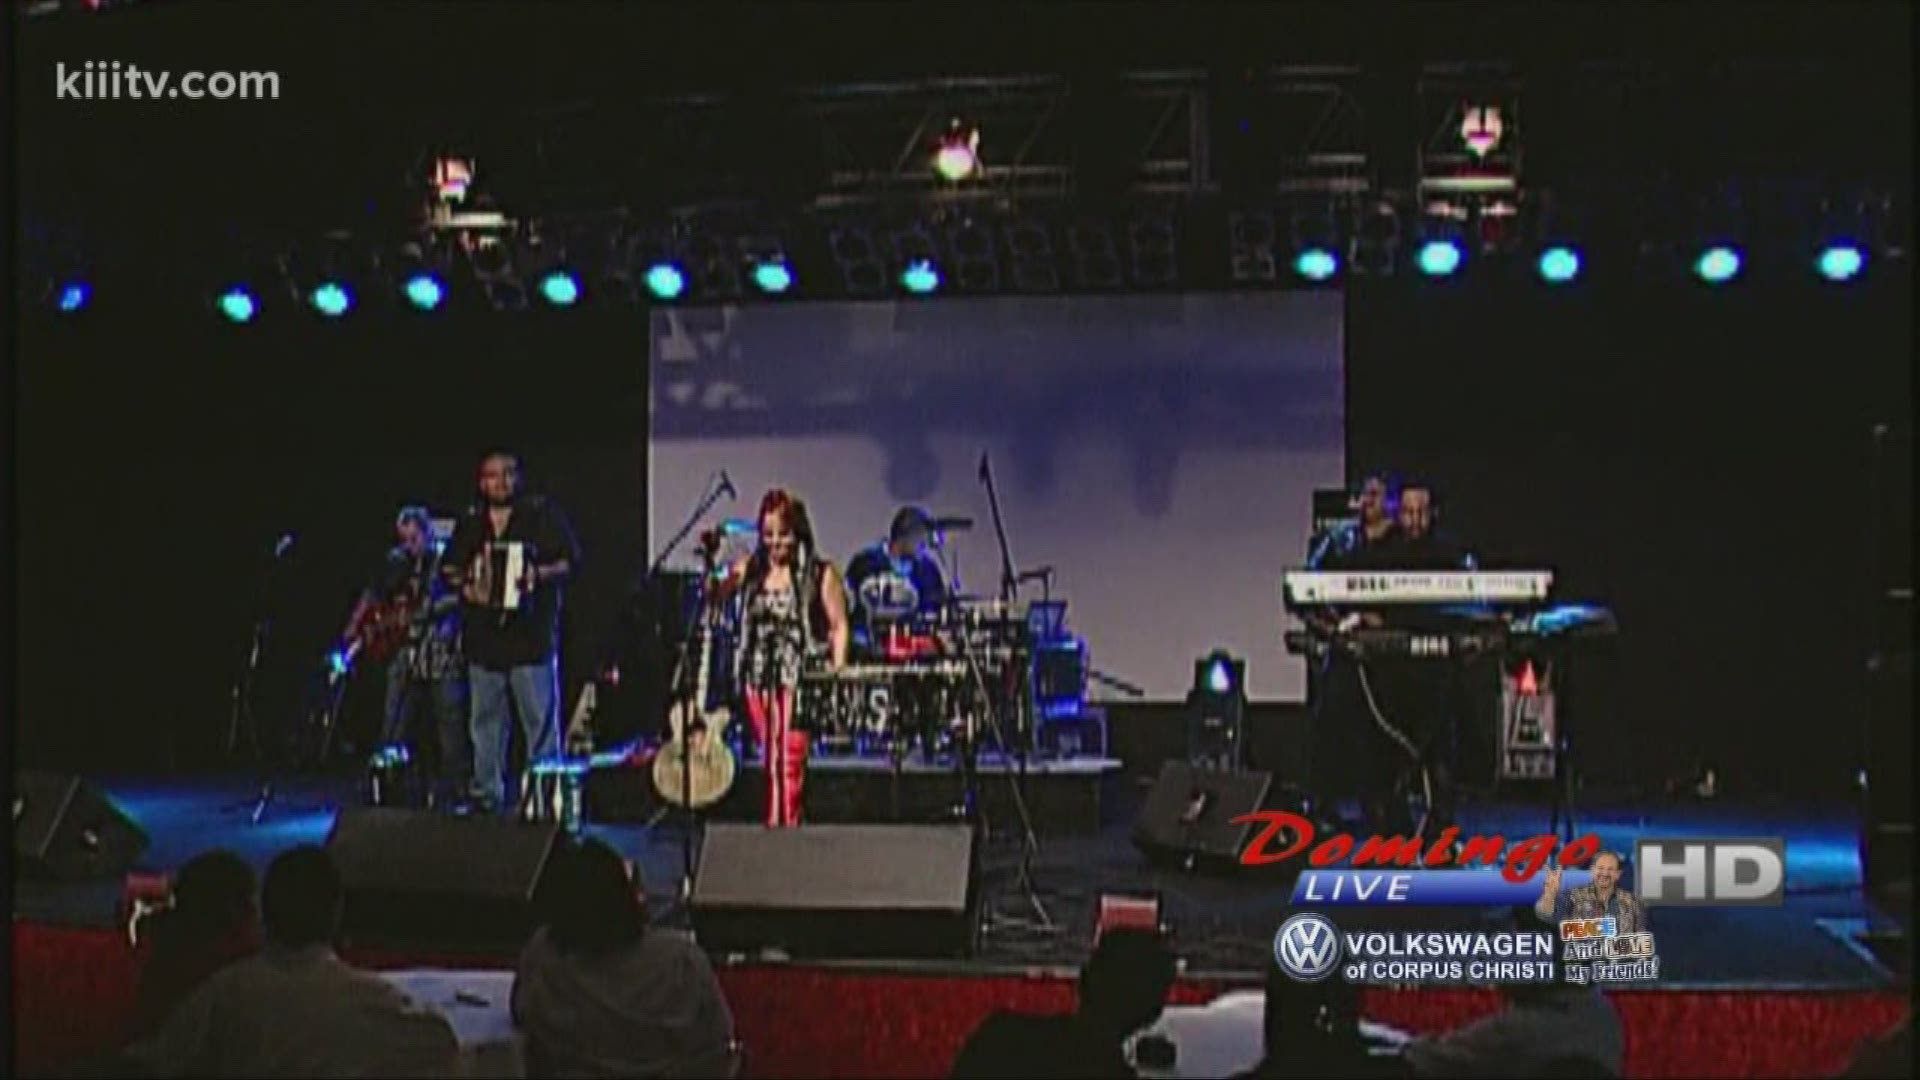 Shelly Lares "No Me Olvides" performance courtesy of Q-Productions, on Domingo Live.